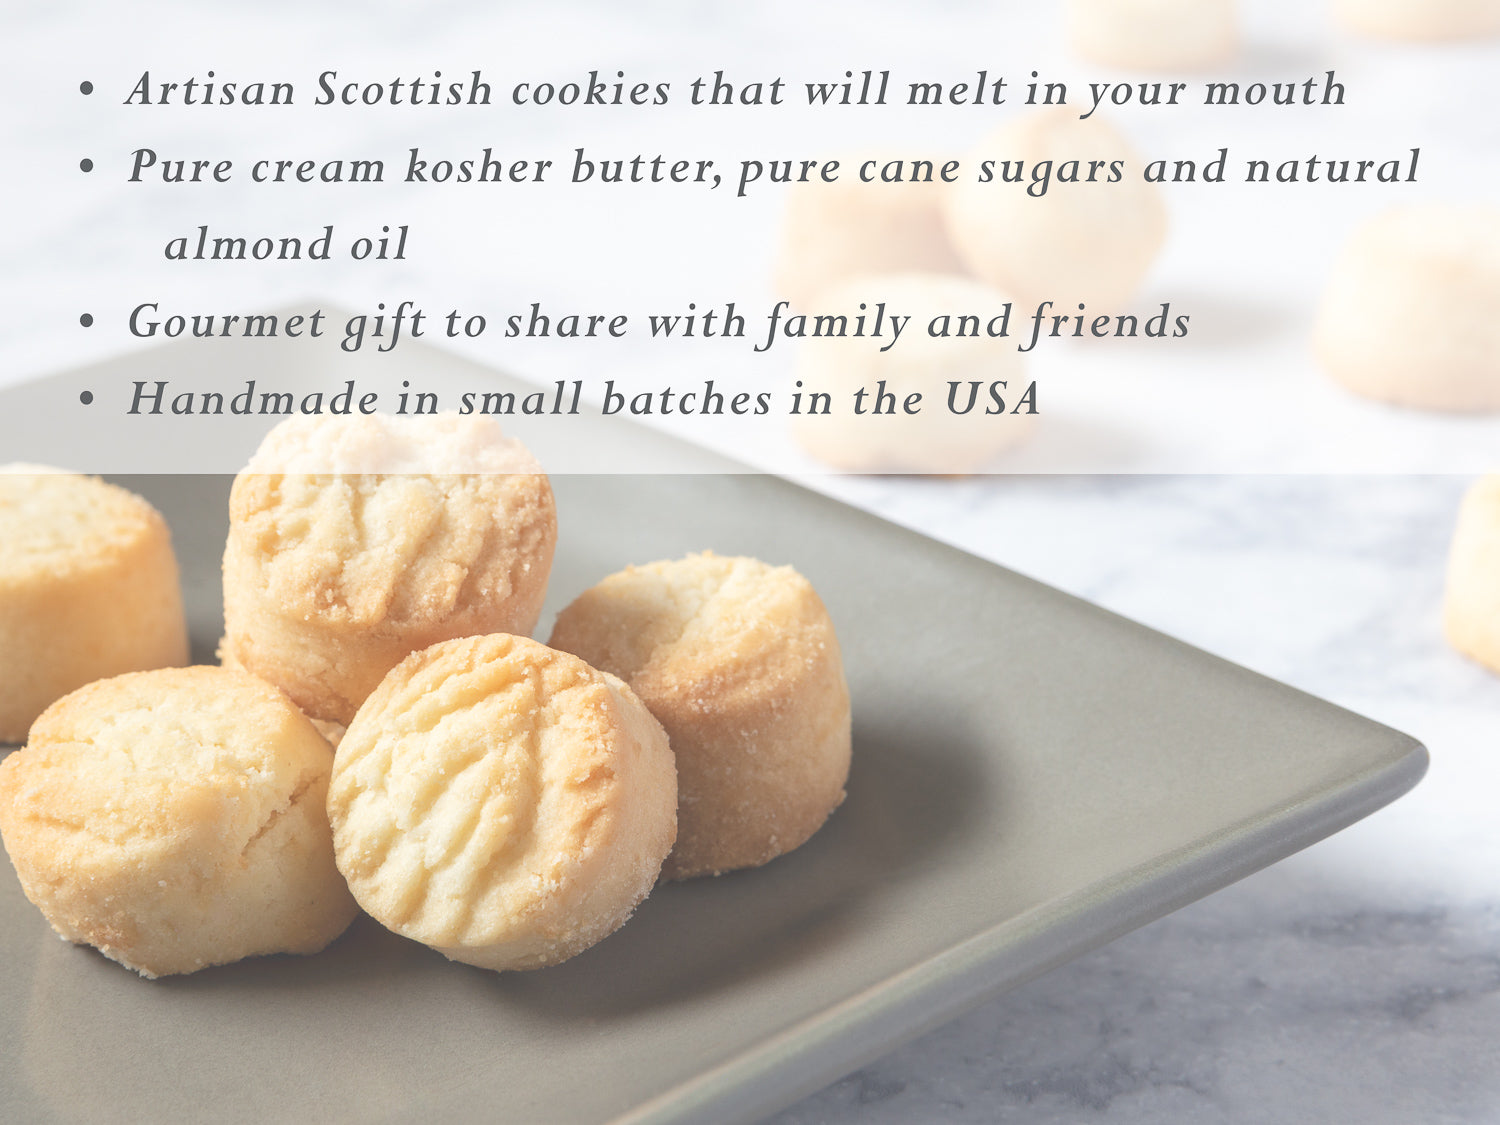 bullet points of the features of northwest expressions classic shortbread